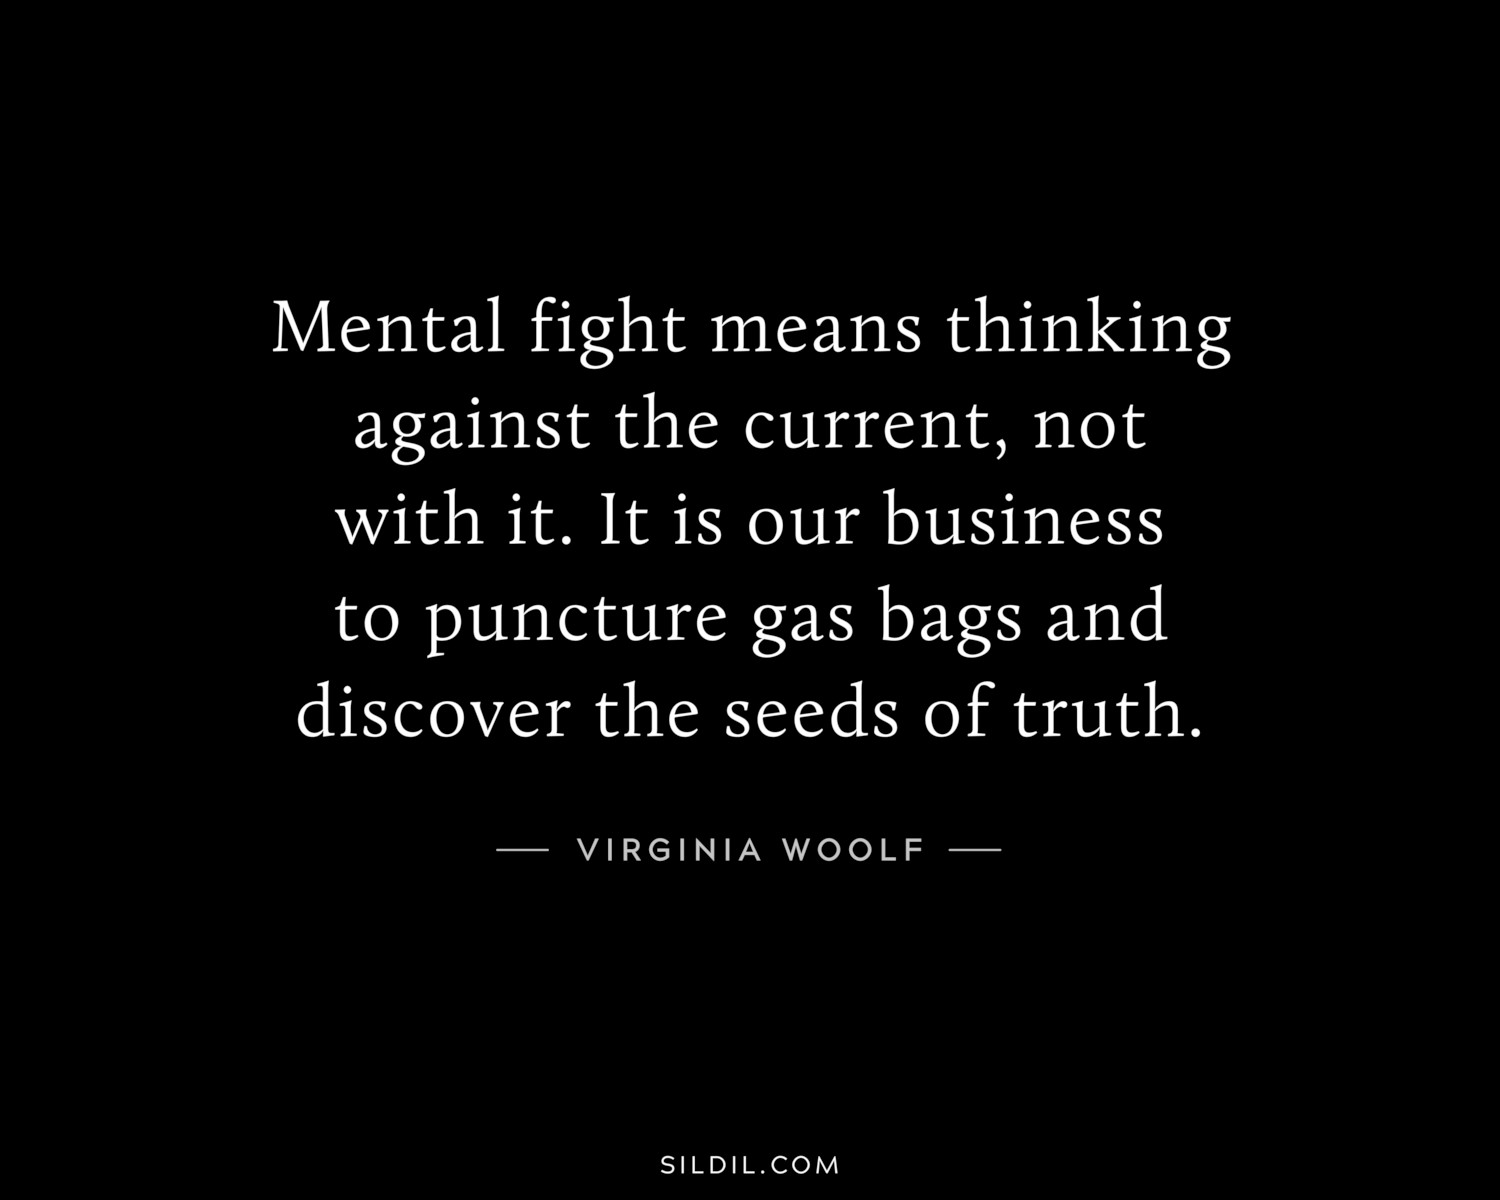 Mental fight means thinking against the current, not with it. It is our business to puncture gas bags and discover the seeds of truth.